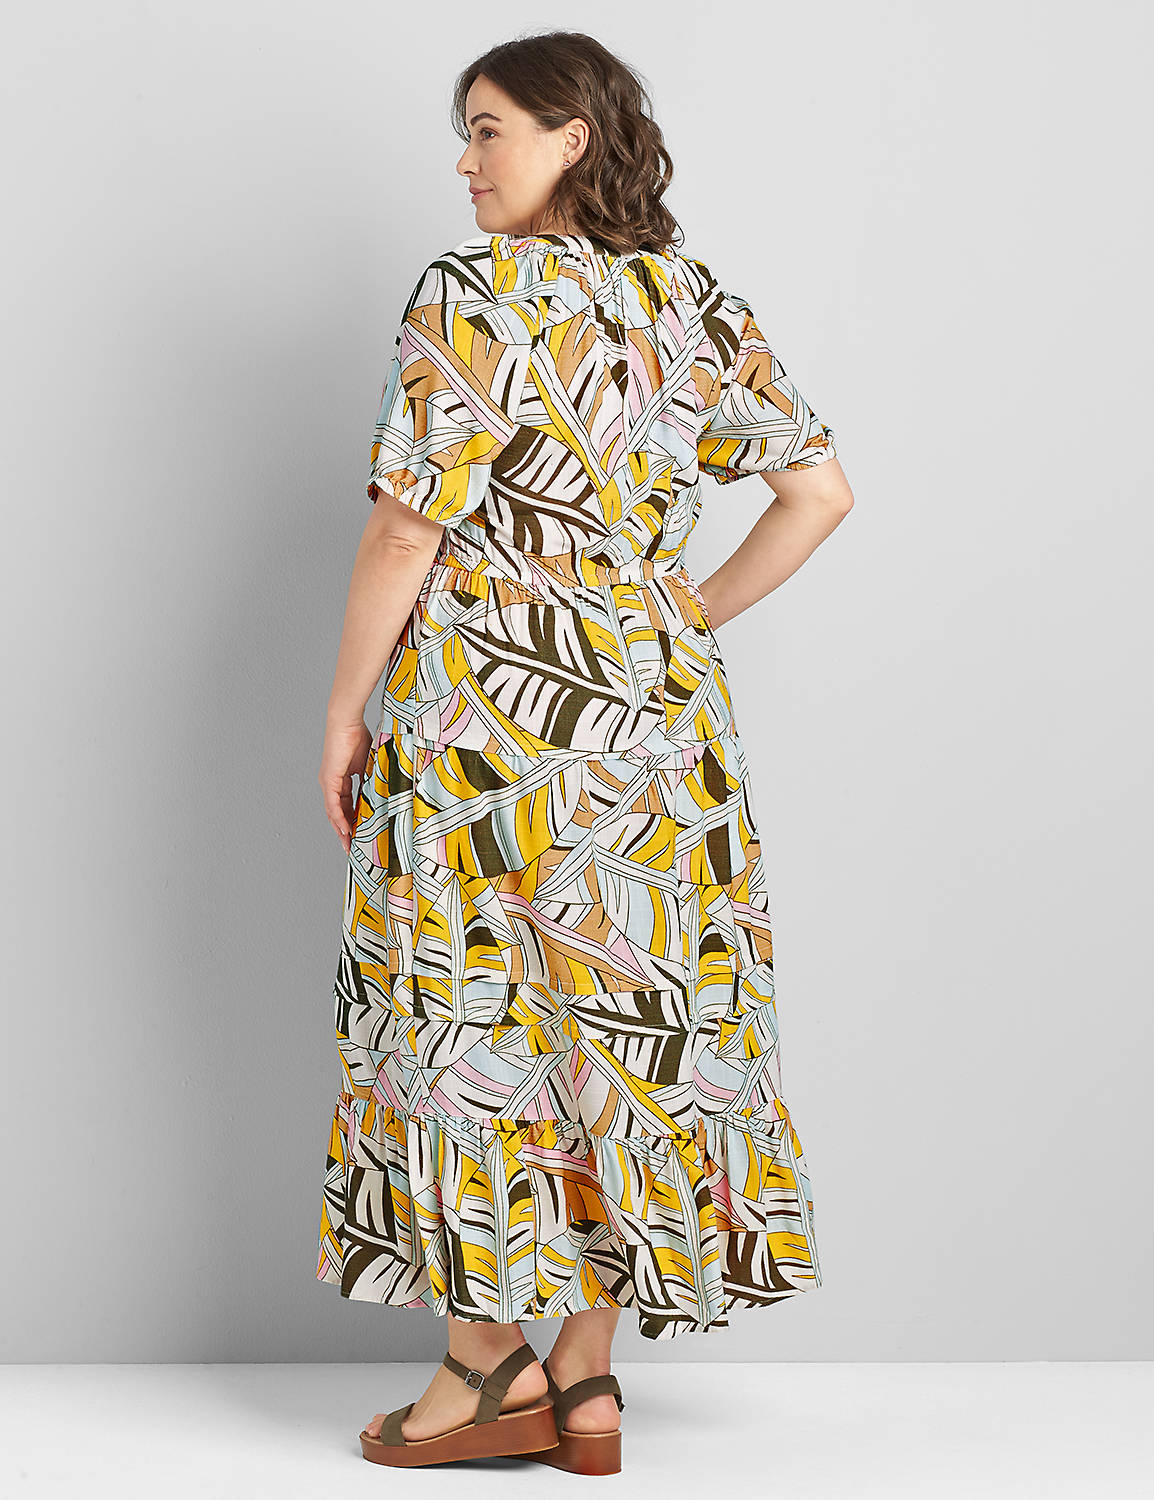 Elbow Sleeve Notch Neck Tuck Detail Maxi Dress1120931:LBSU21105_OutlinePalm_C6:18 Product Image 2